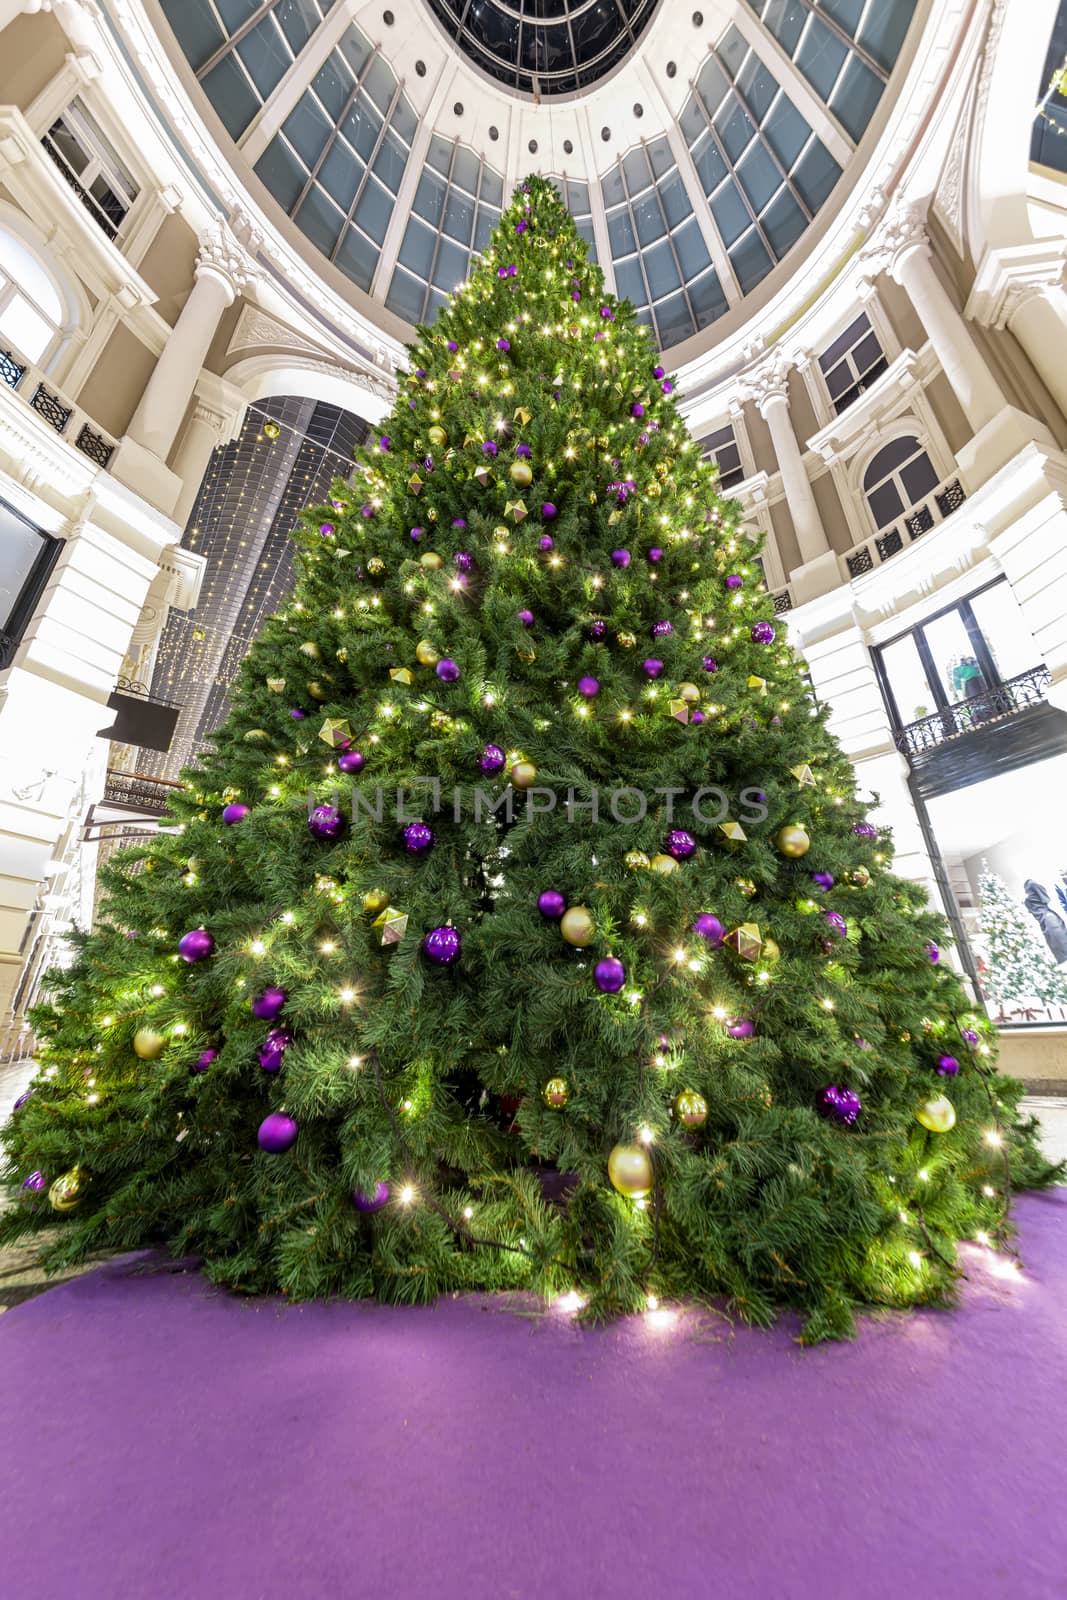 Huge christmas tree in The Hague celebrating the Christmas and the New Year season by ankorlight